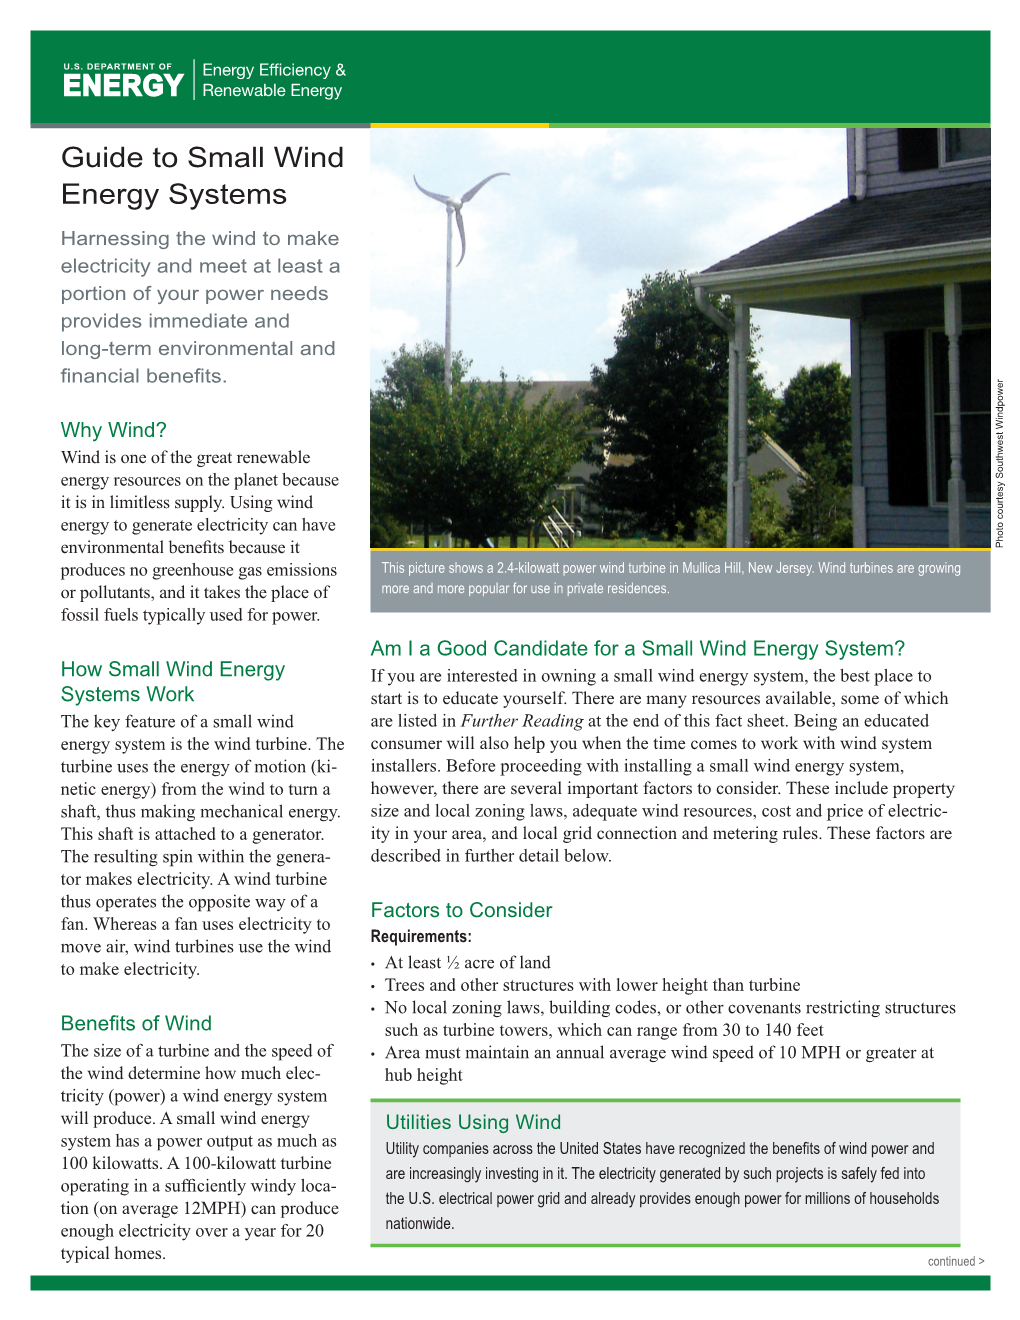 Guide to Small Wind Energy Systems